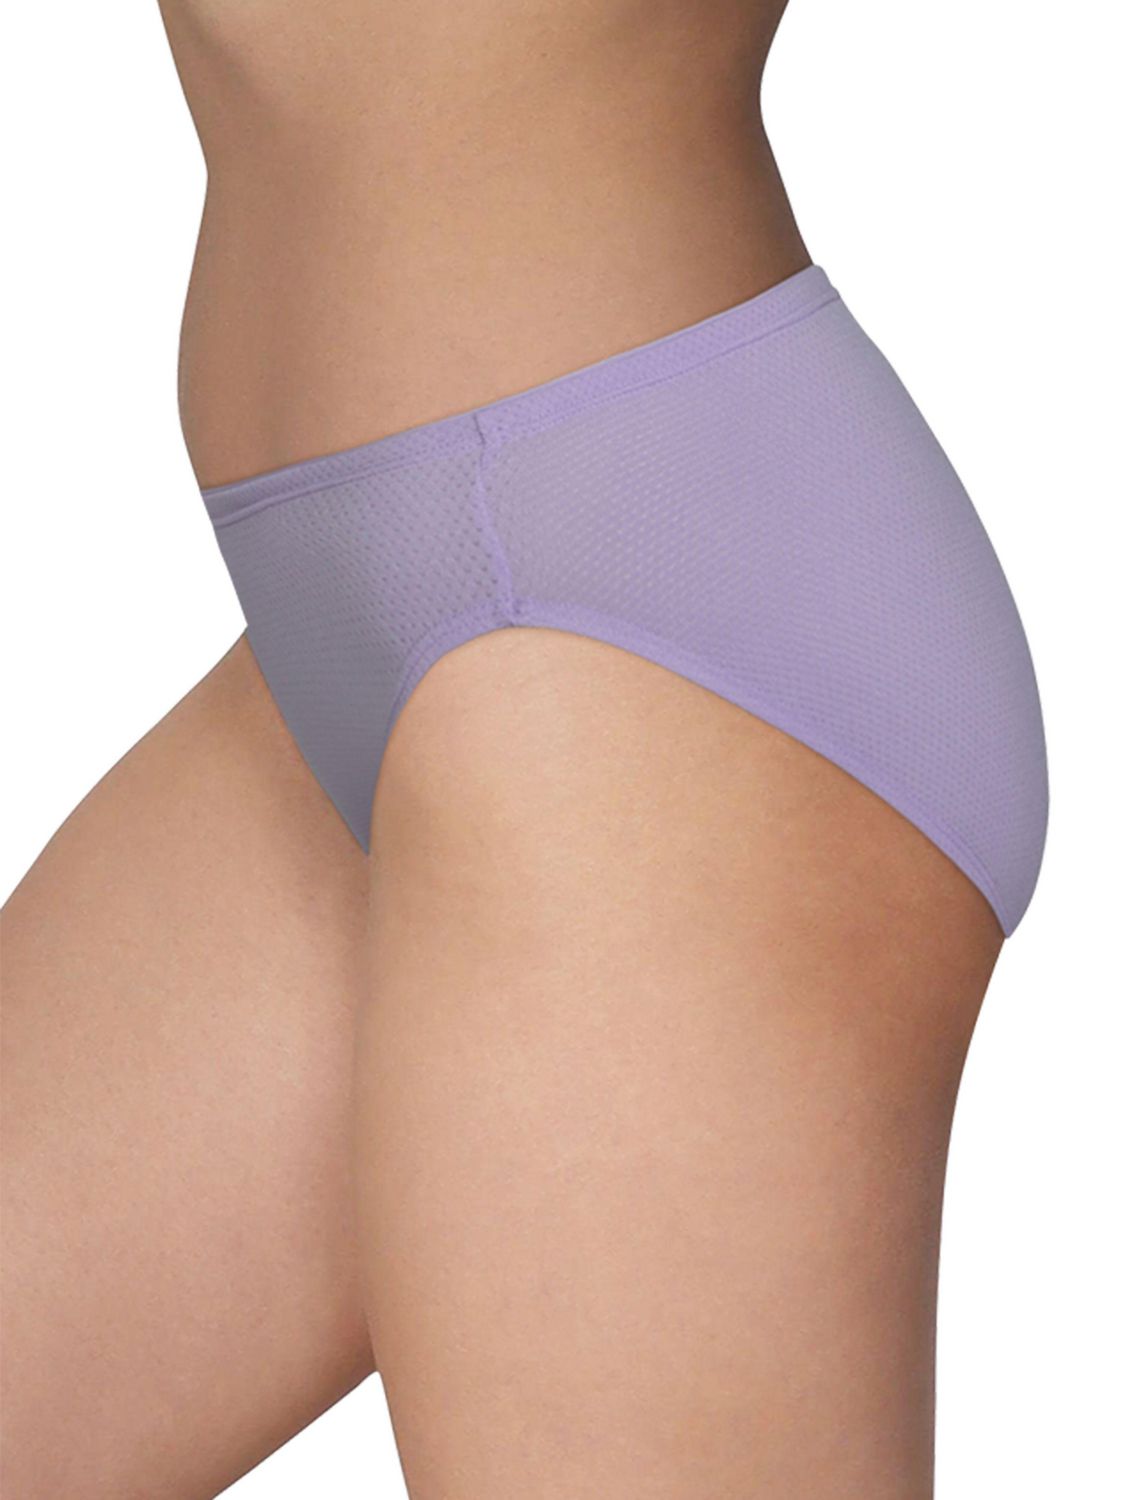 Buy Women's Breathable Underwear Multipack (Assorted) (XXX-Large